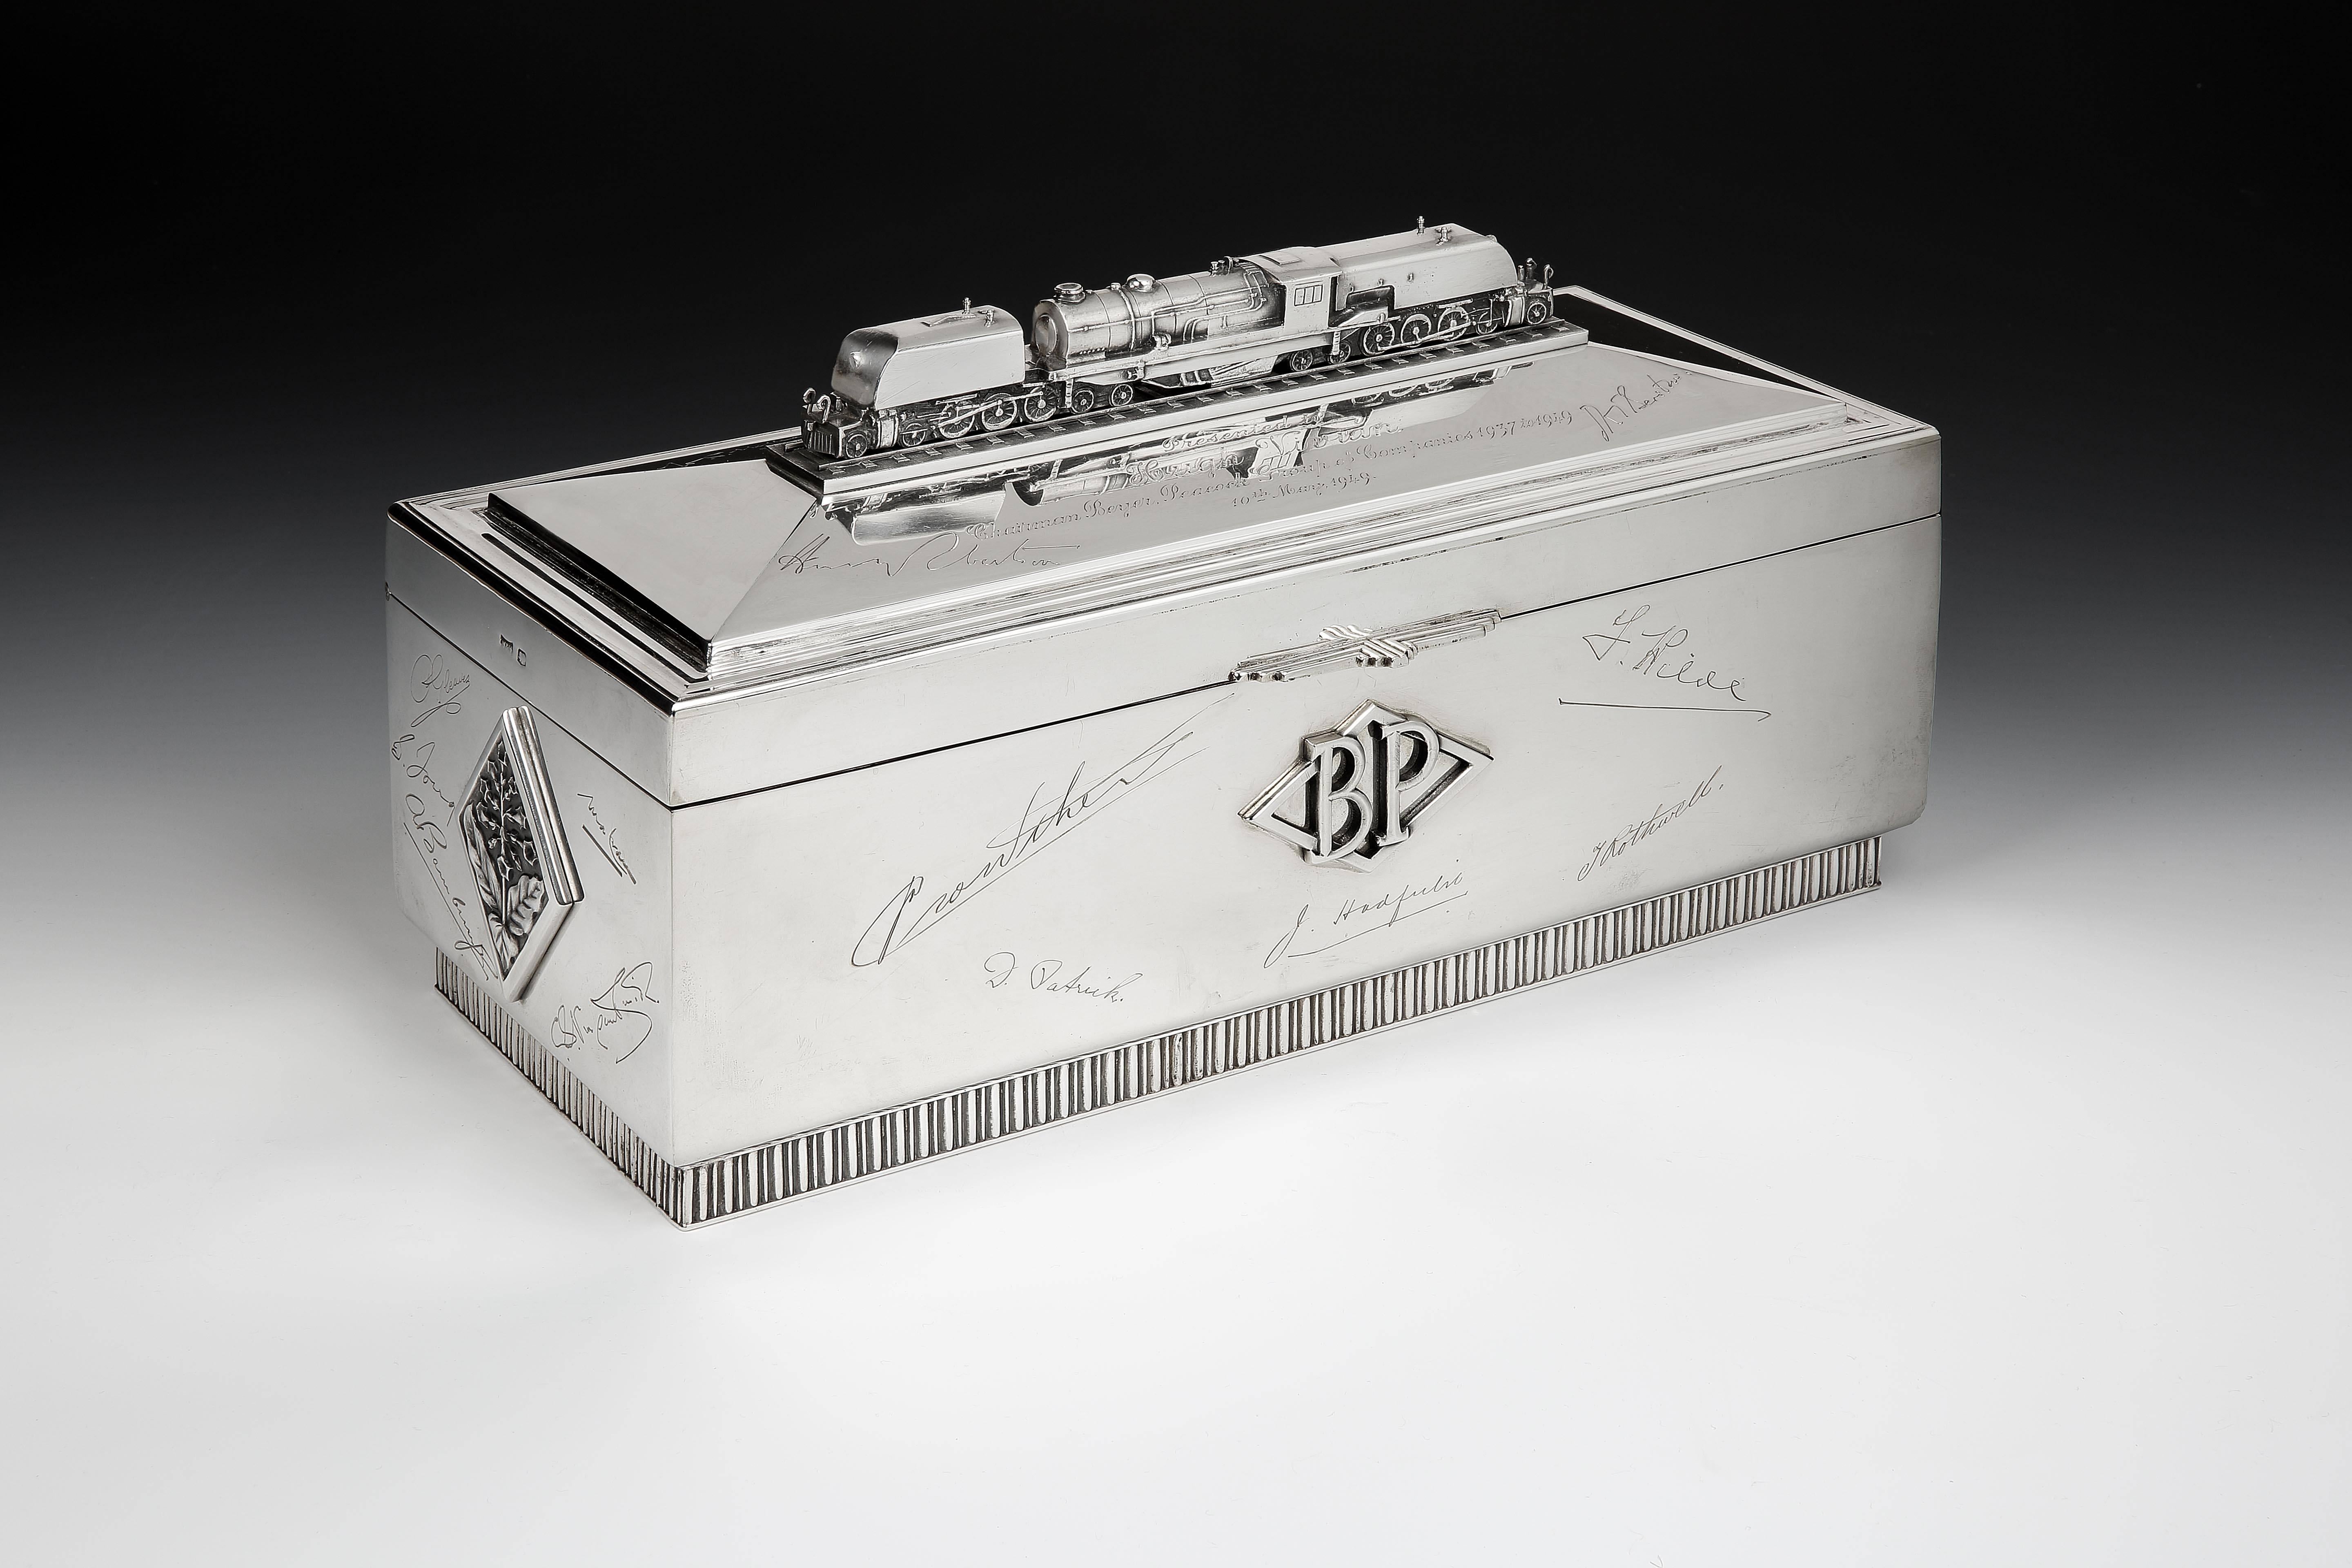 A massive and extremely impressive, Sterling silver cigar box made by the well-respected Sheffield firm of Silversmiths Walker & Hall, and commissioned as a presentation piece in 1948 and gifted to leading Welsh industrialist Hugh Vivian